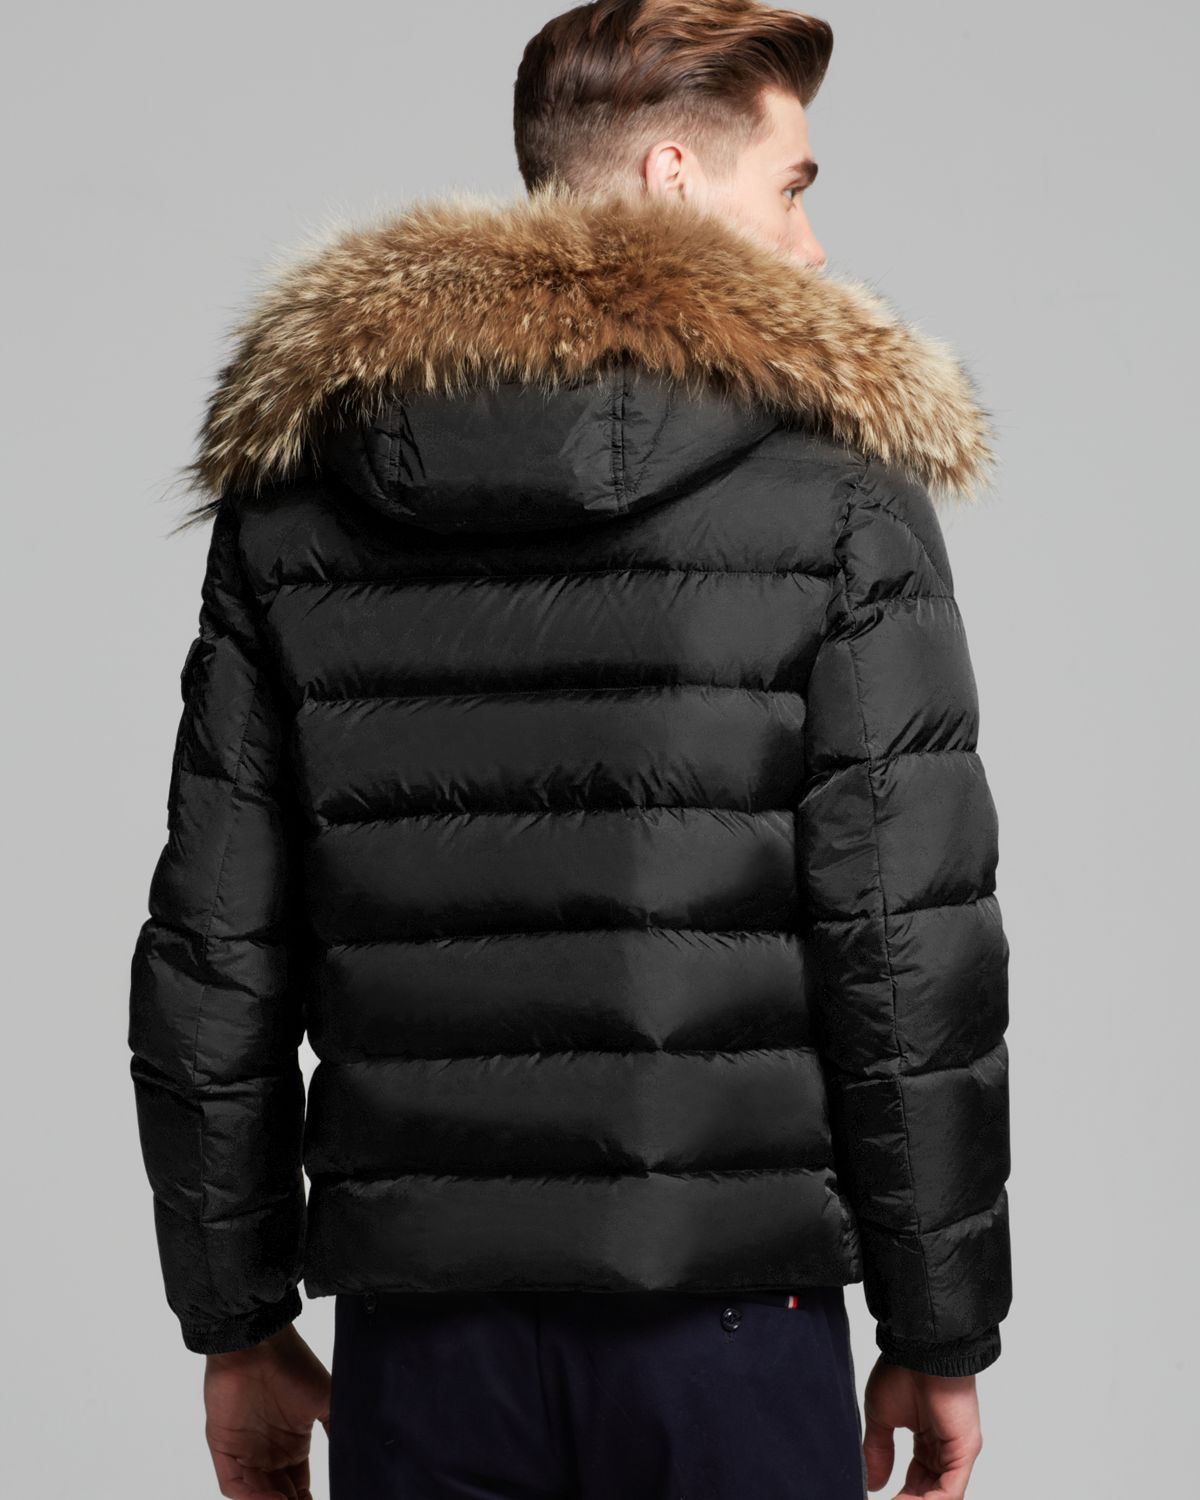 Lyst - Moncler Byron Down Jacket With Fur Hood in Black for Men